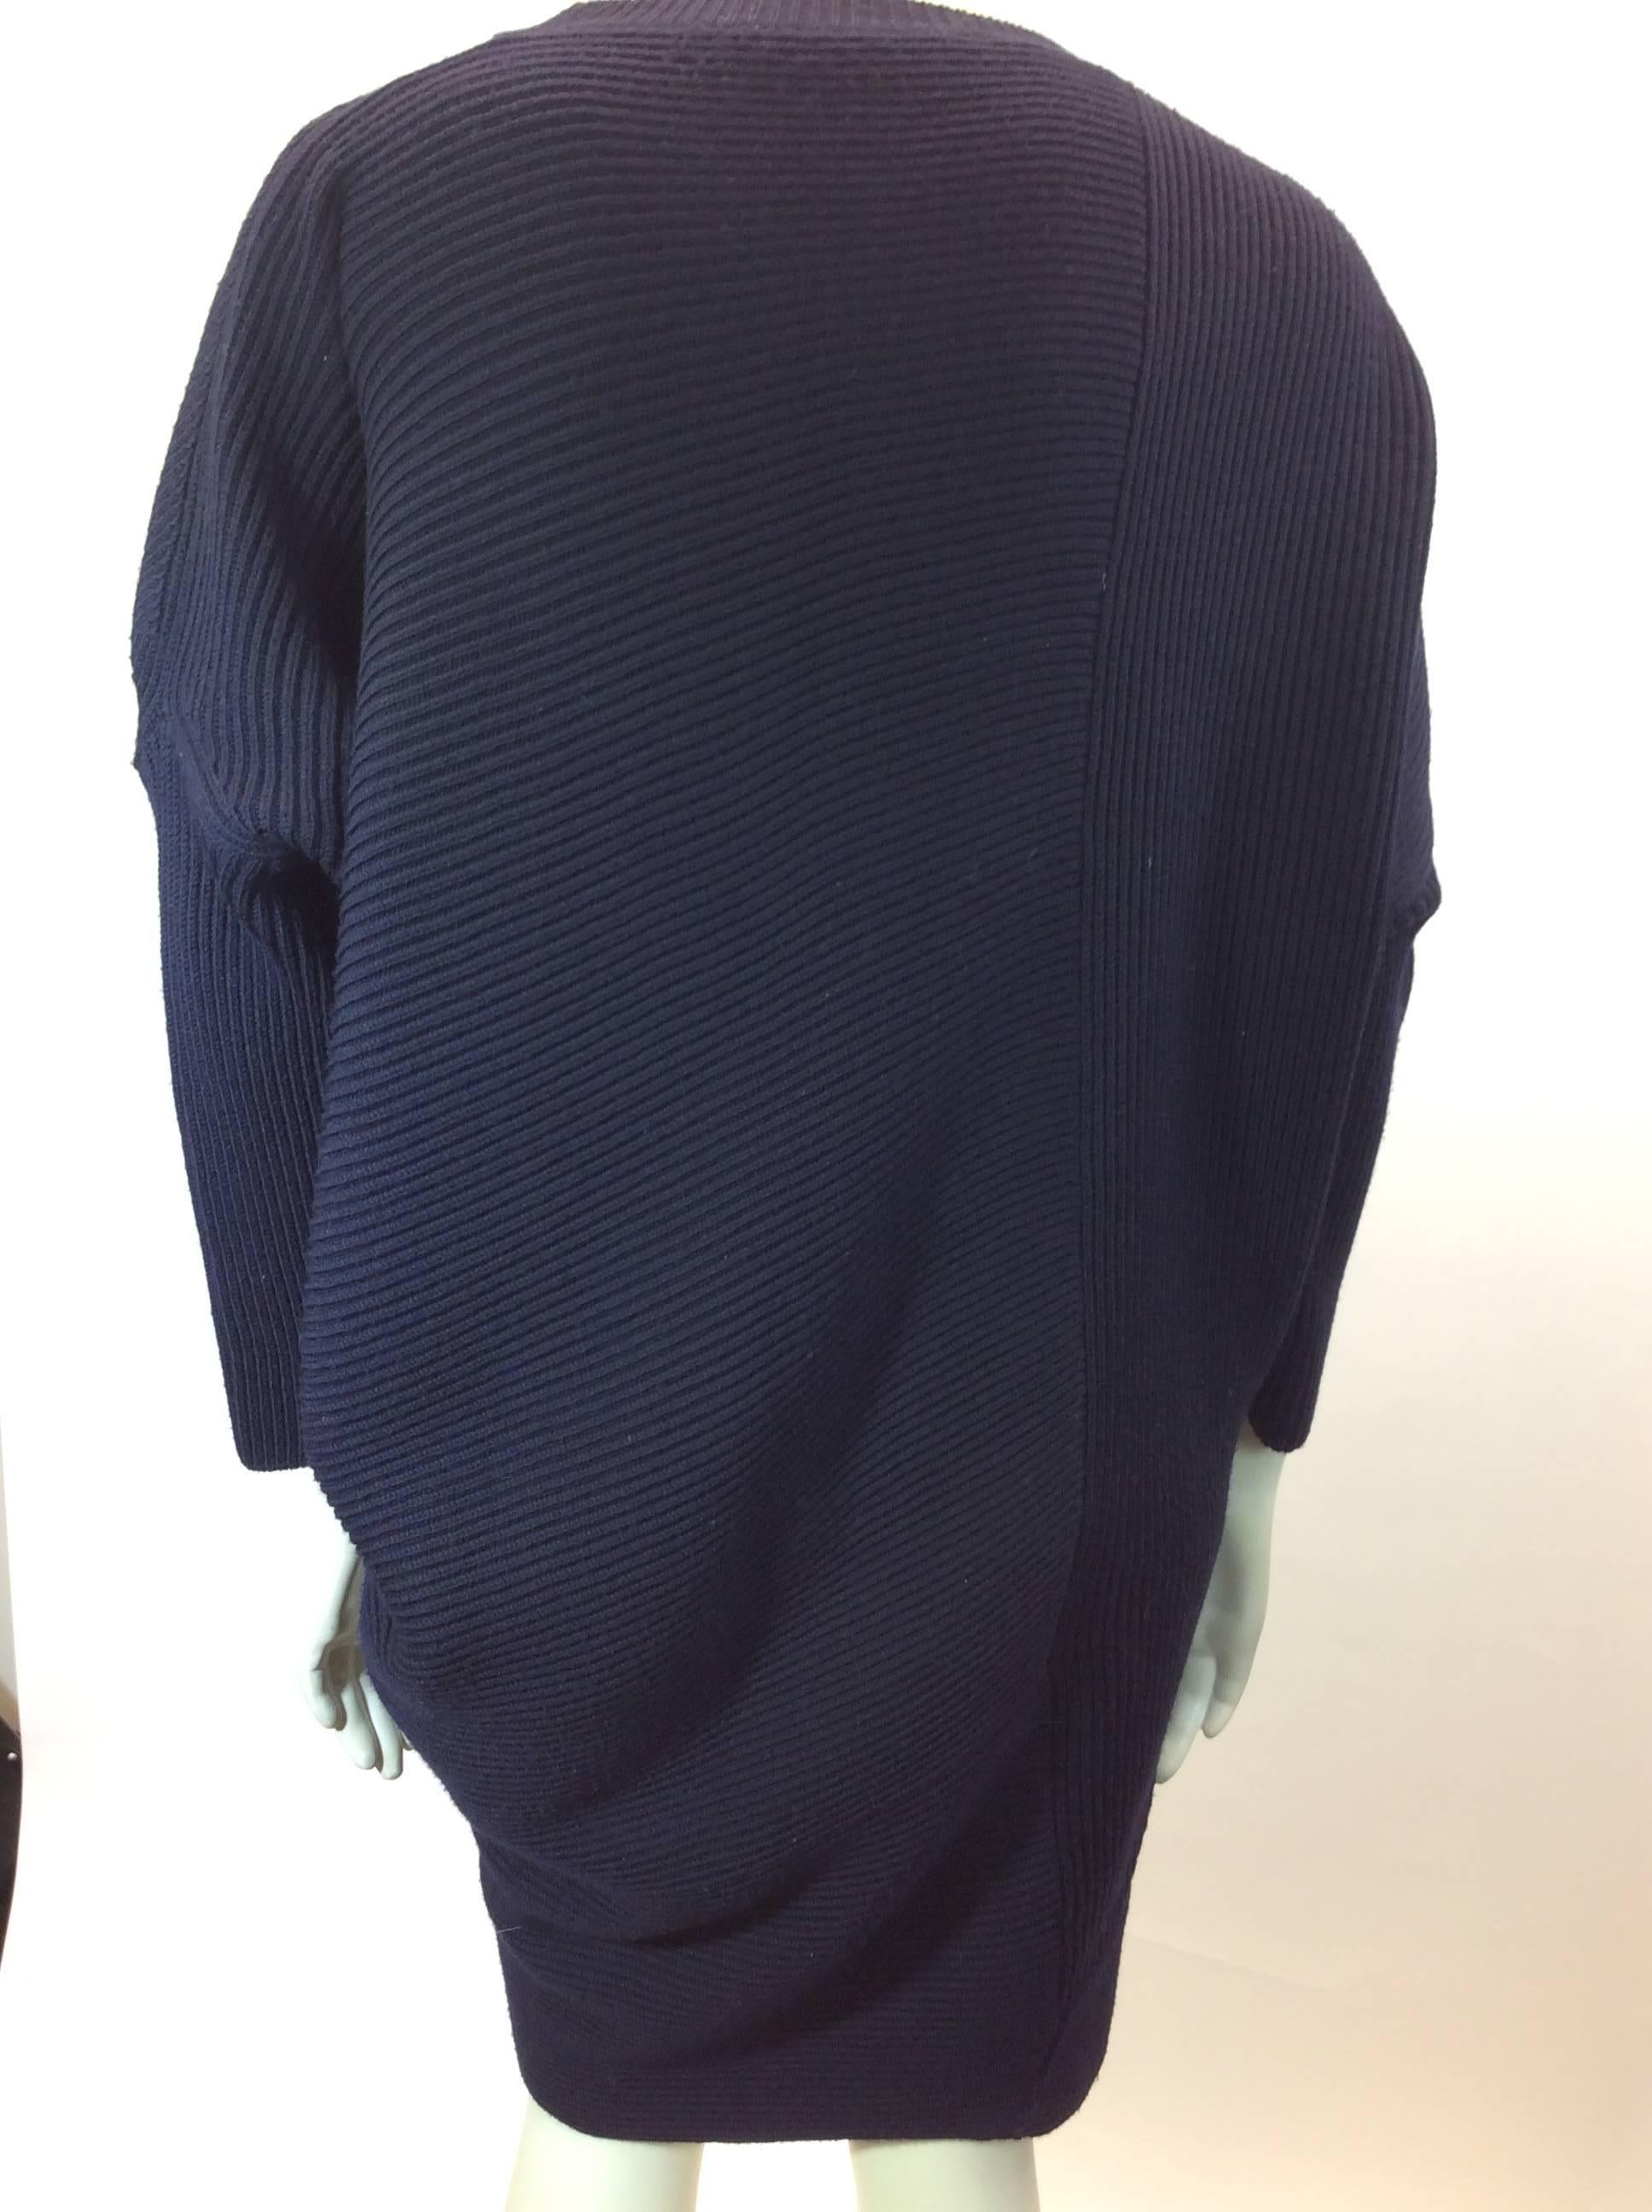 Stella McCartney Deep Navy Tunic In Excellent Condition For Sale In Narberth, PA